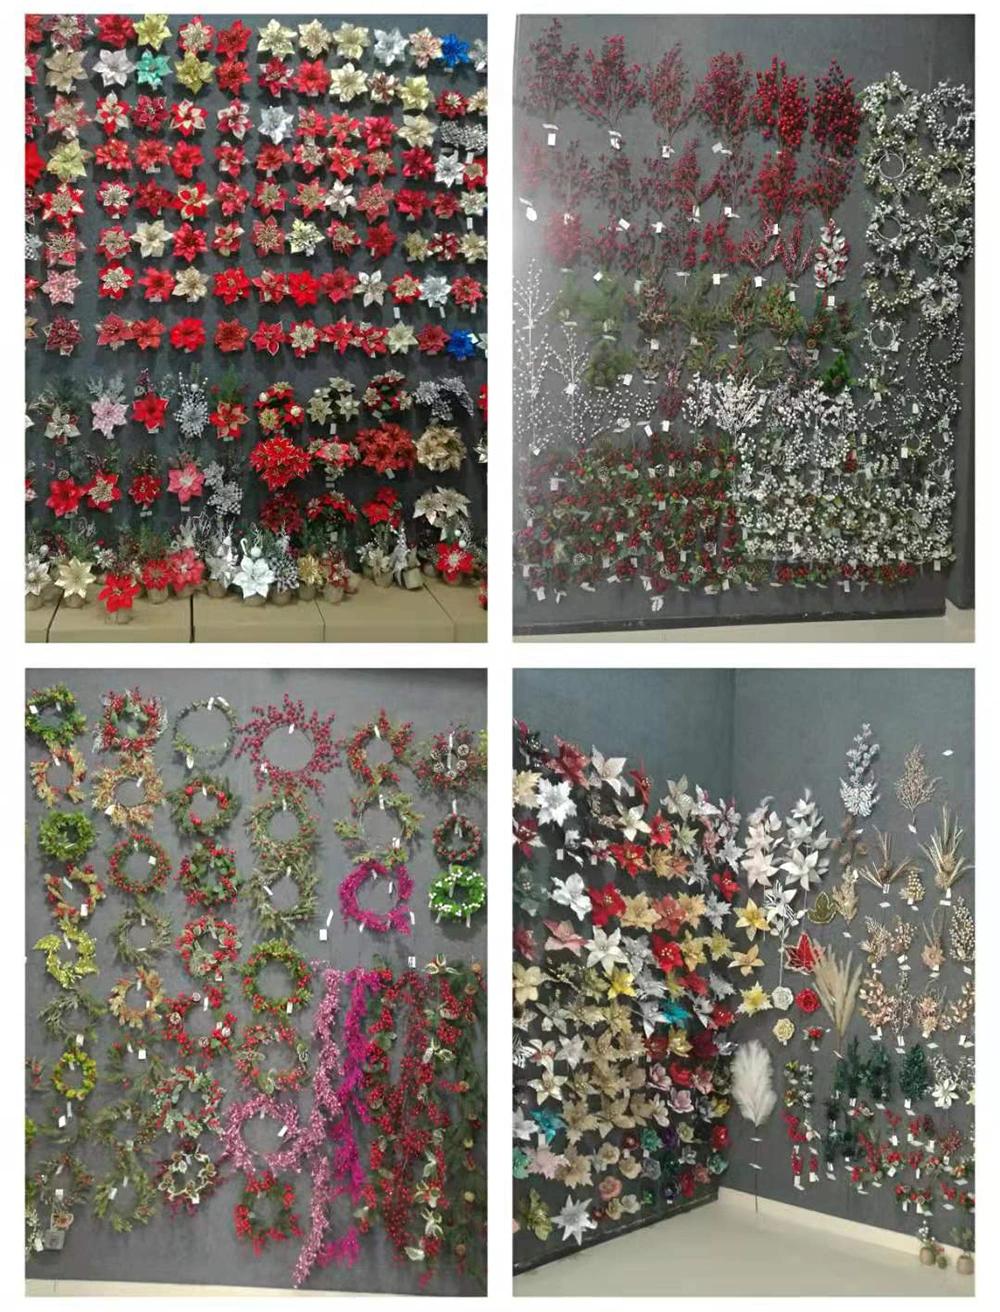 Christmas Pet Tinsel Artificial Flowers for Holiday Wedding Party Decoration Supplies Hook Ornament Craft Gifts